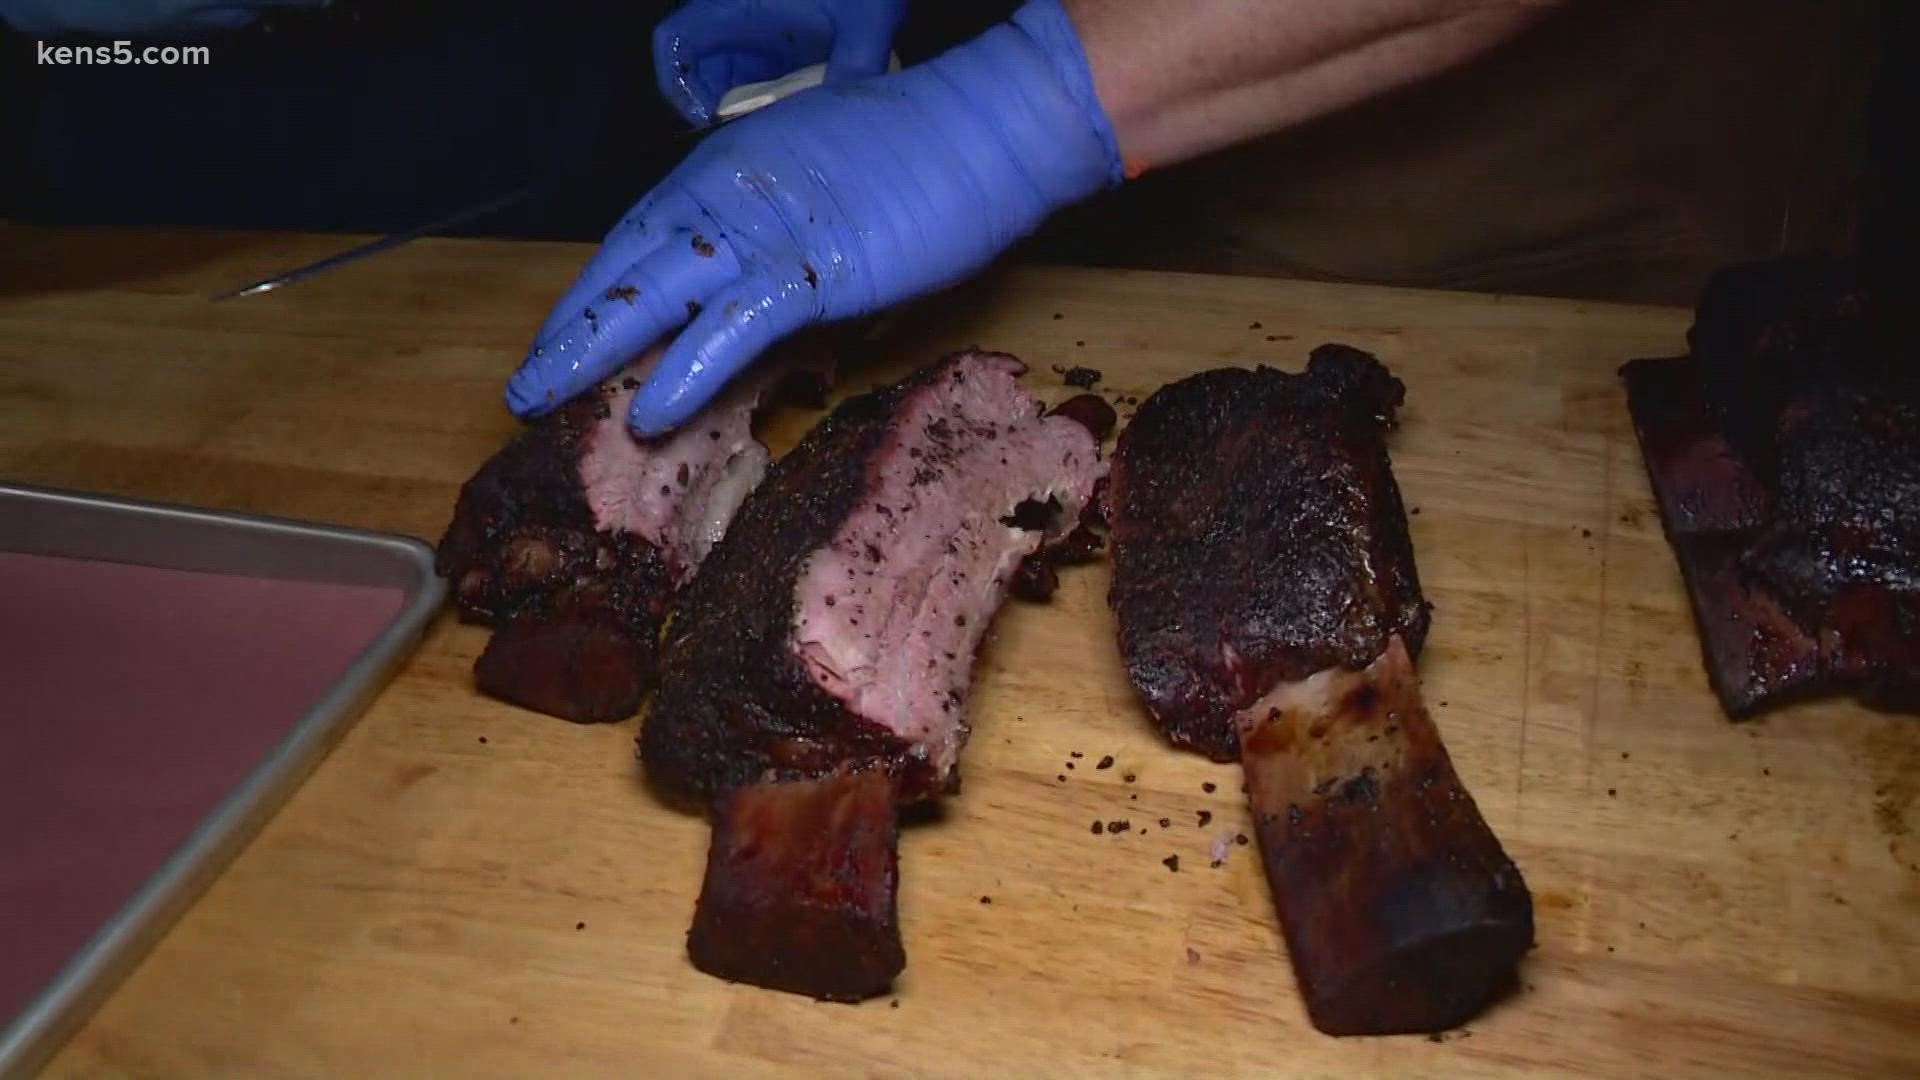 If you're going to spend some time in front of a grill, watch this first!